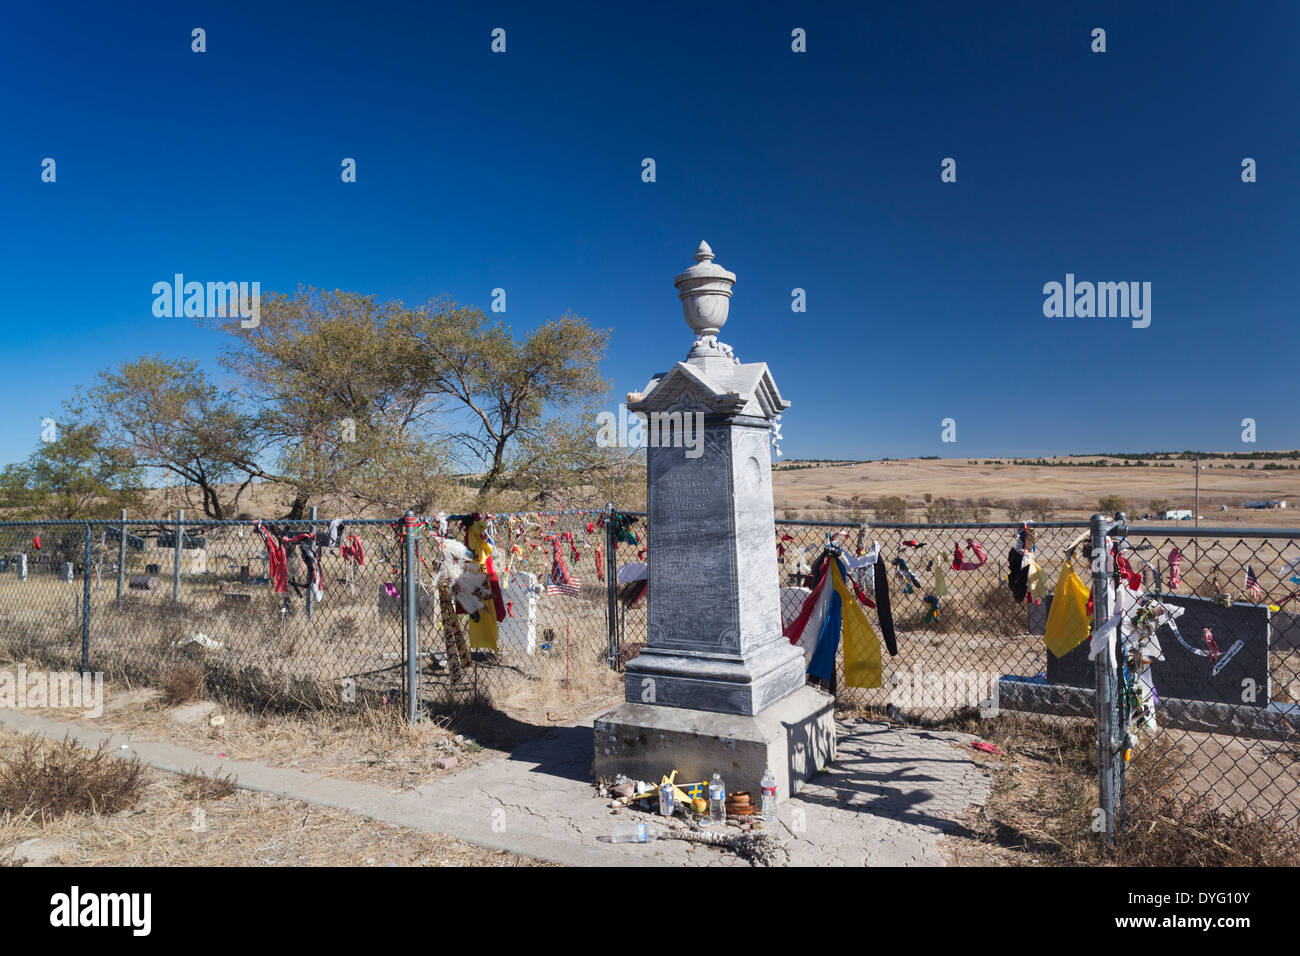 South Dakota, Wounded Knee Massacre National Historic Site, cemetery of over 250 Native Americans massacred on December 29, 1893 Stock Photo